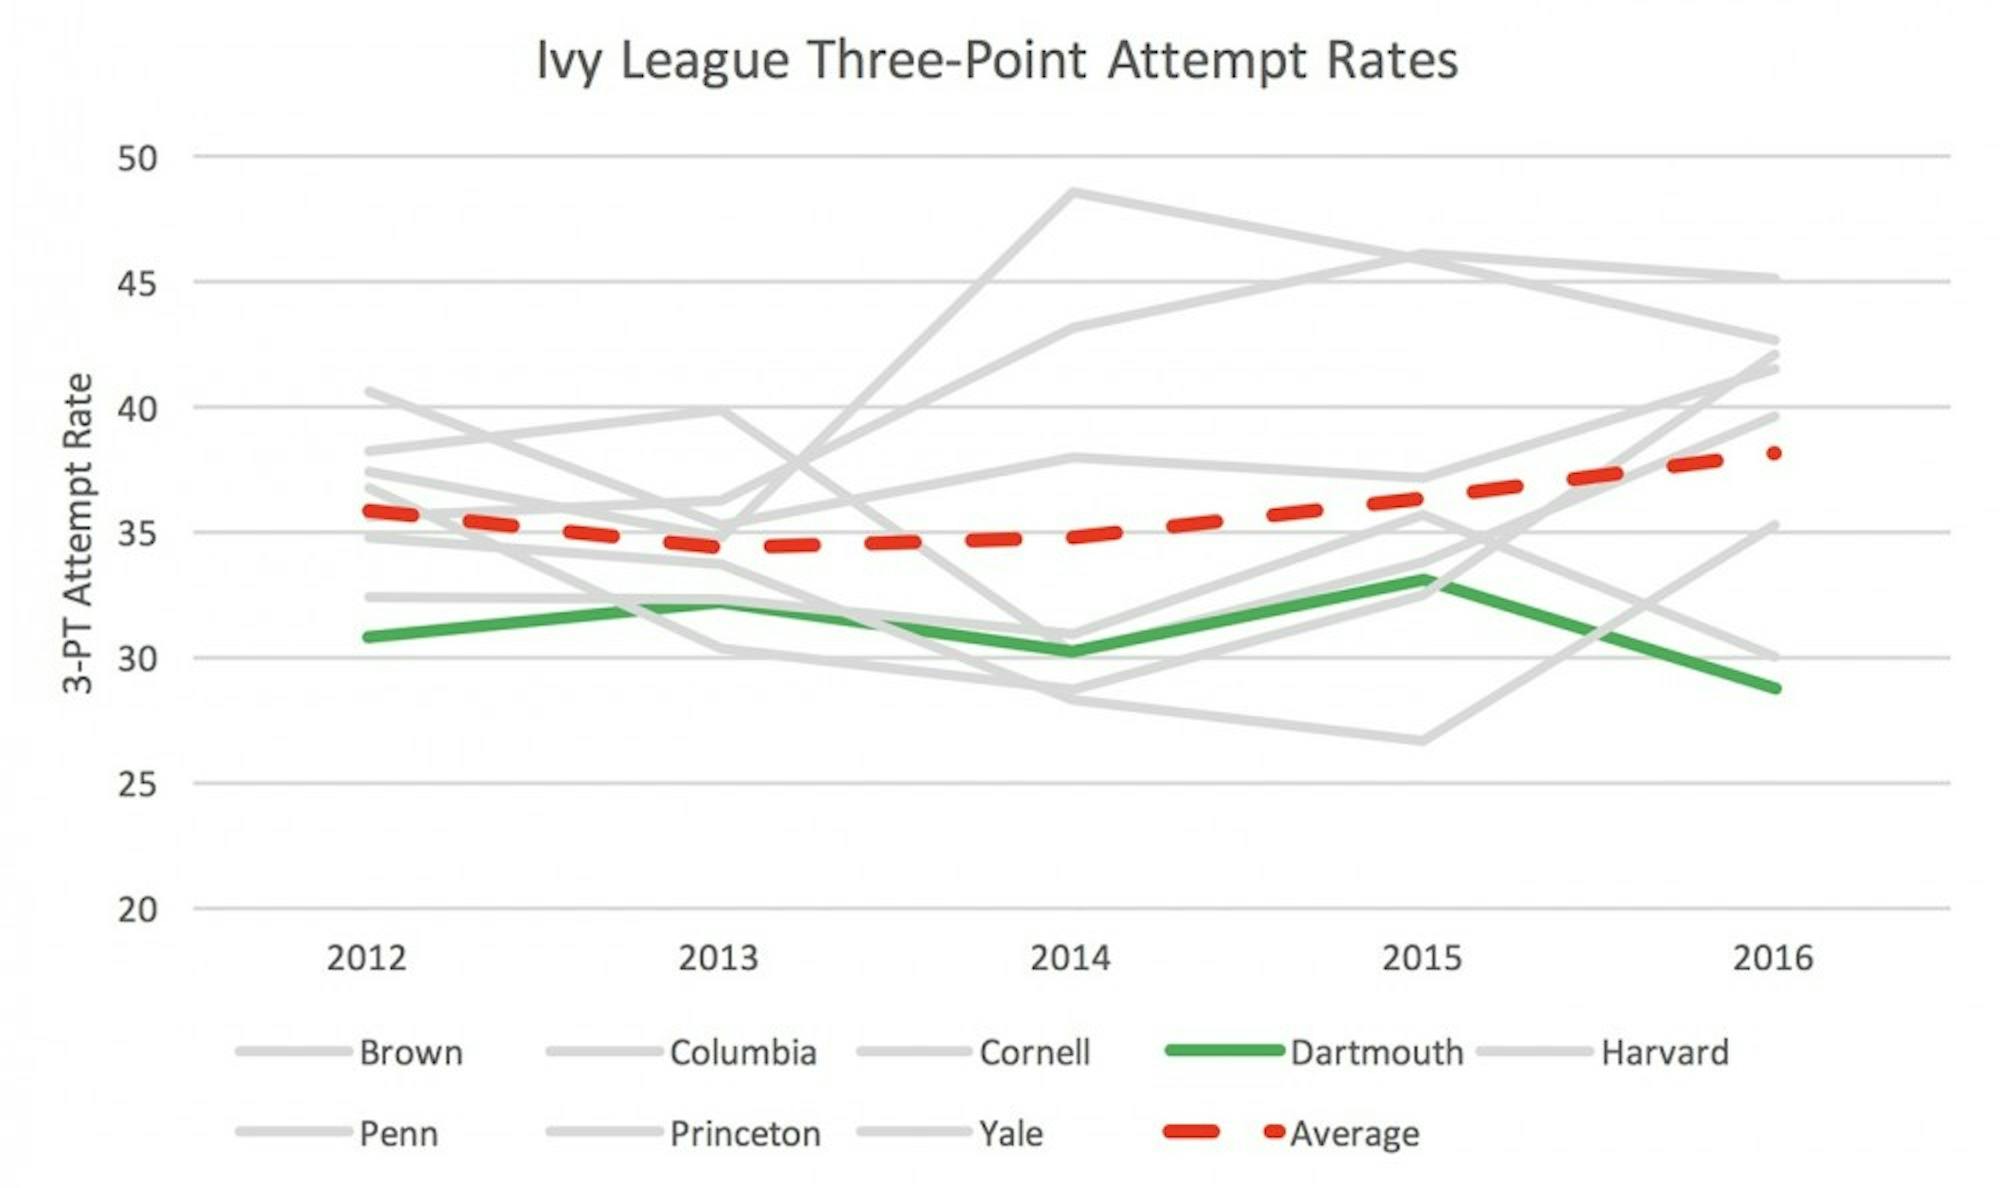 Dartmouth has been reluctant to adapt to the growing 3-point shooting trend, falling well below the league average in 2016.